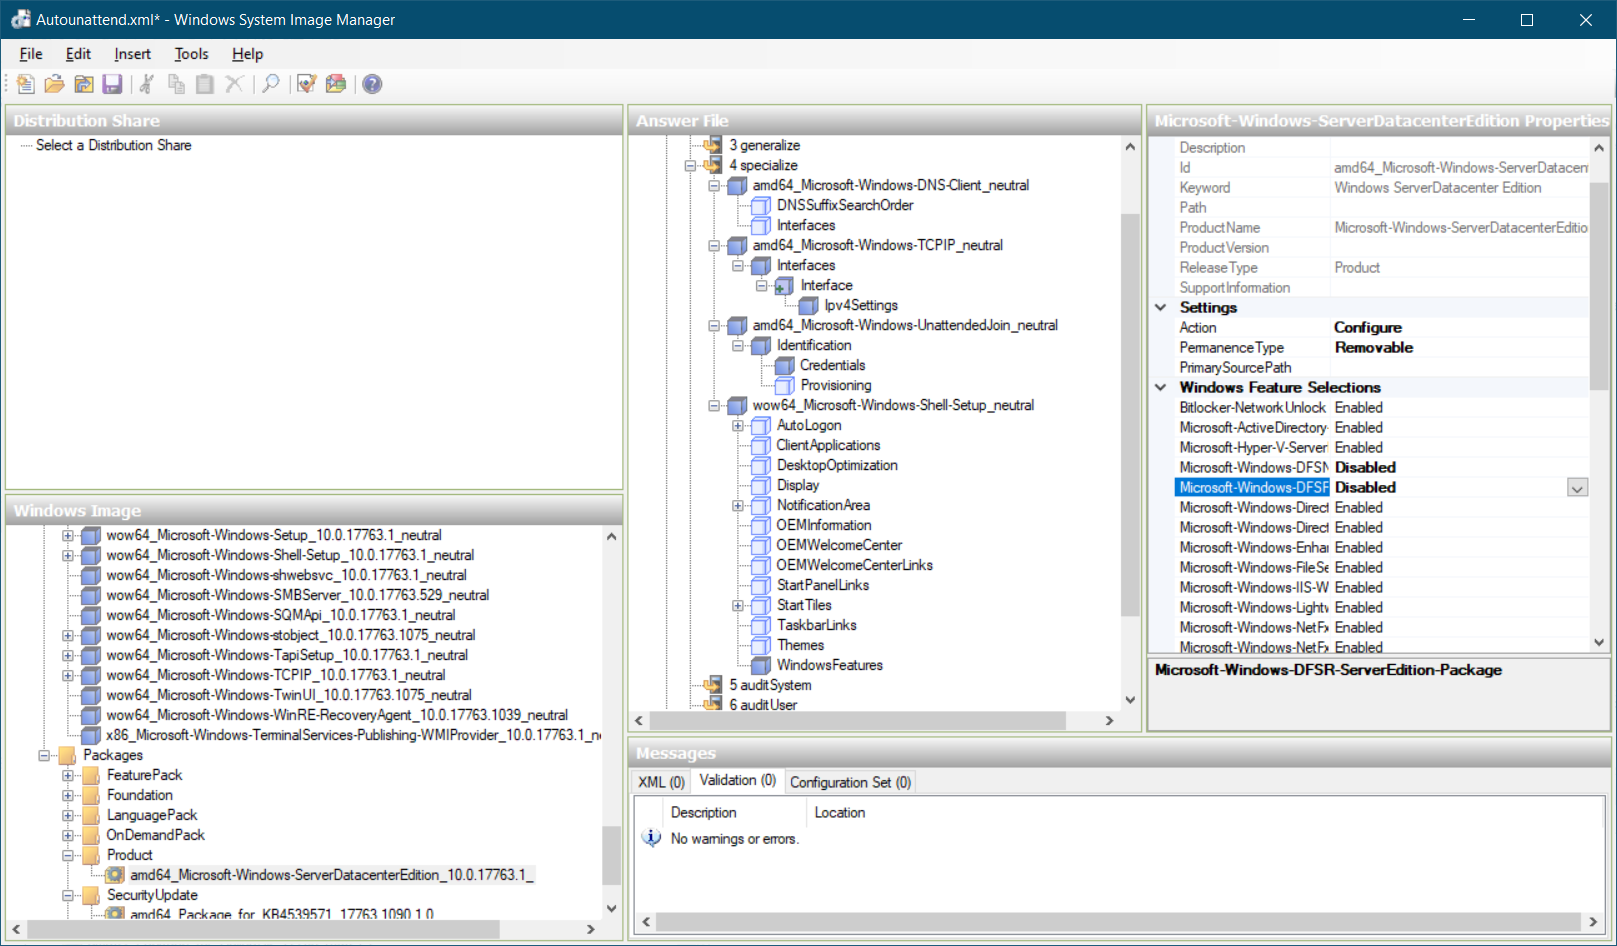 A screenshot of Windows System Image Manager. An answer file called Autounattend.xml is being edited. Numerous components are added to the Answer File section. The administrator is editing values in the Properties section.